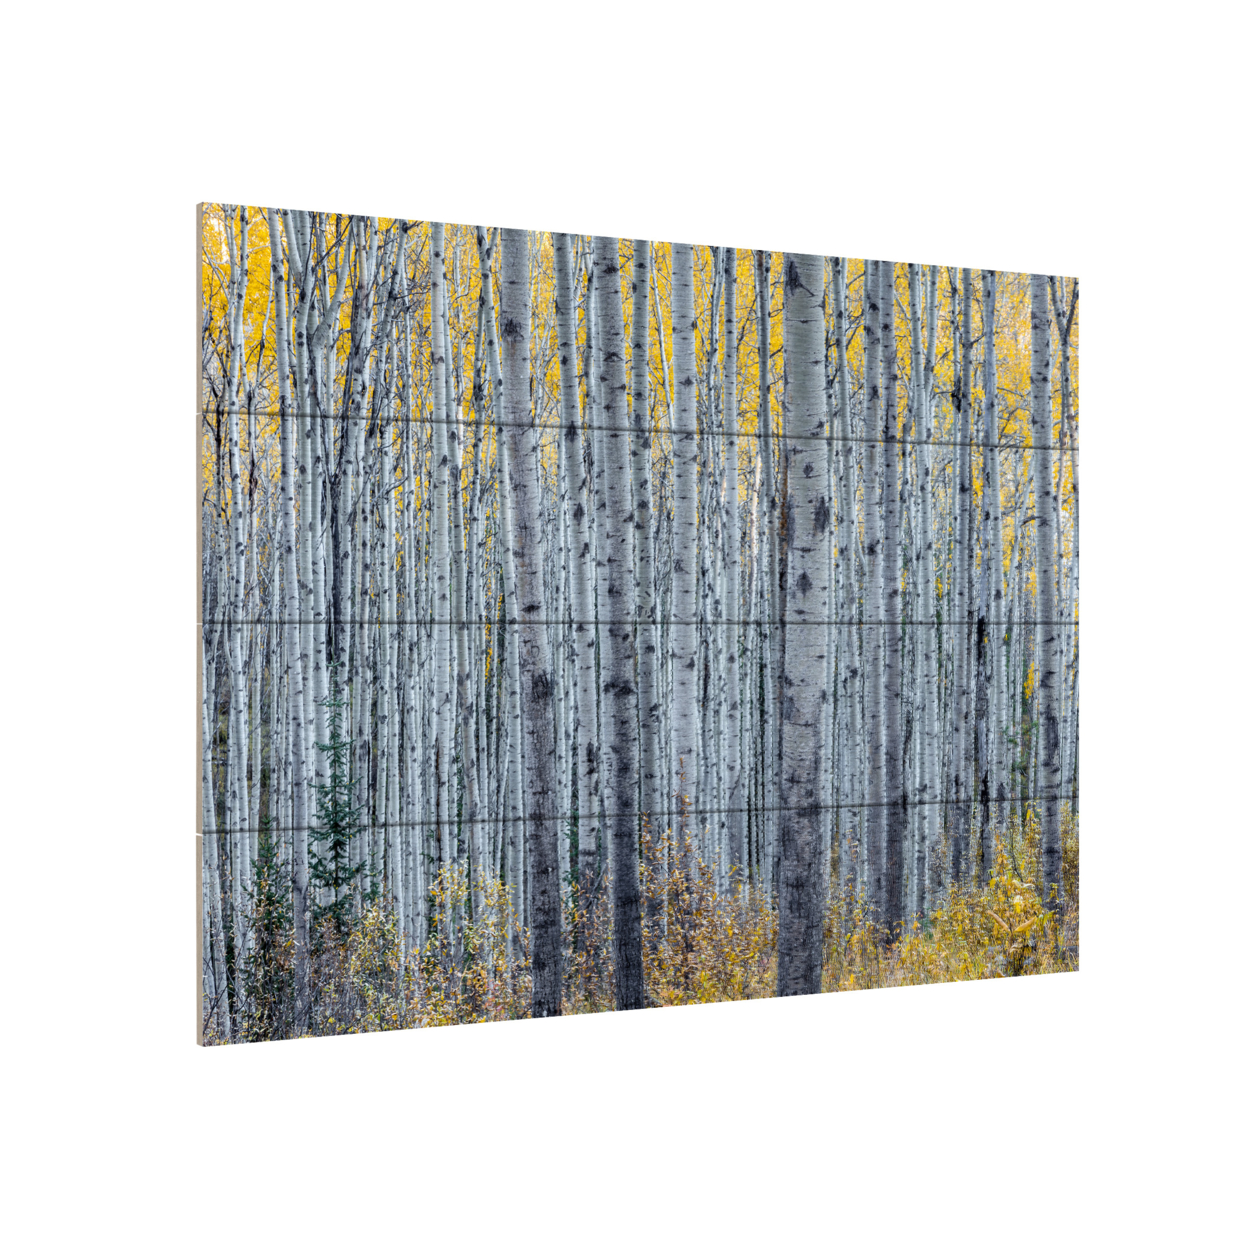 Wall Art 12 X 16 Inches Titled Forest Of Aspen Trees Ready To Hang Printed On Wooden Planks